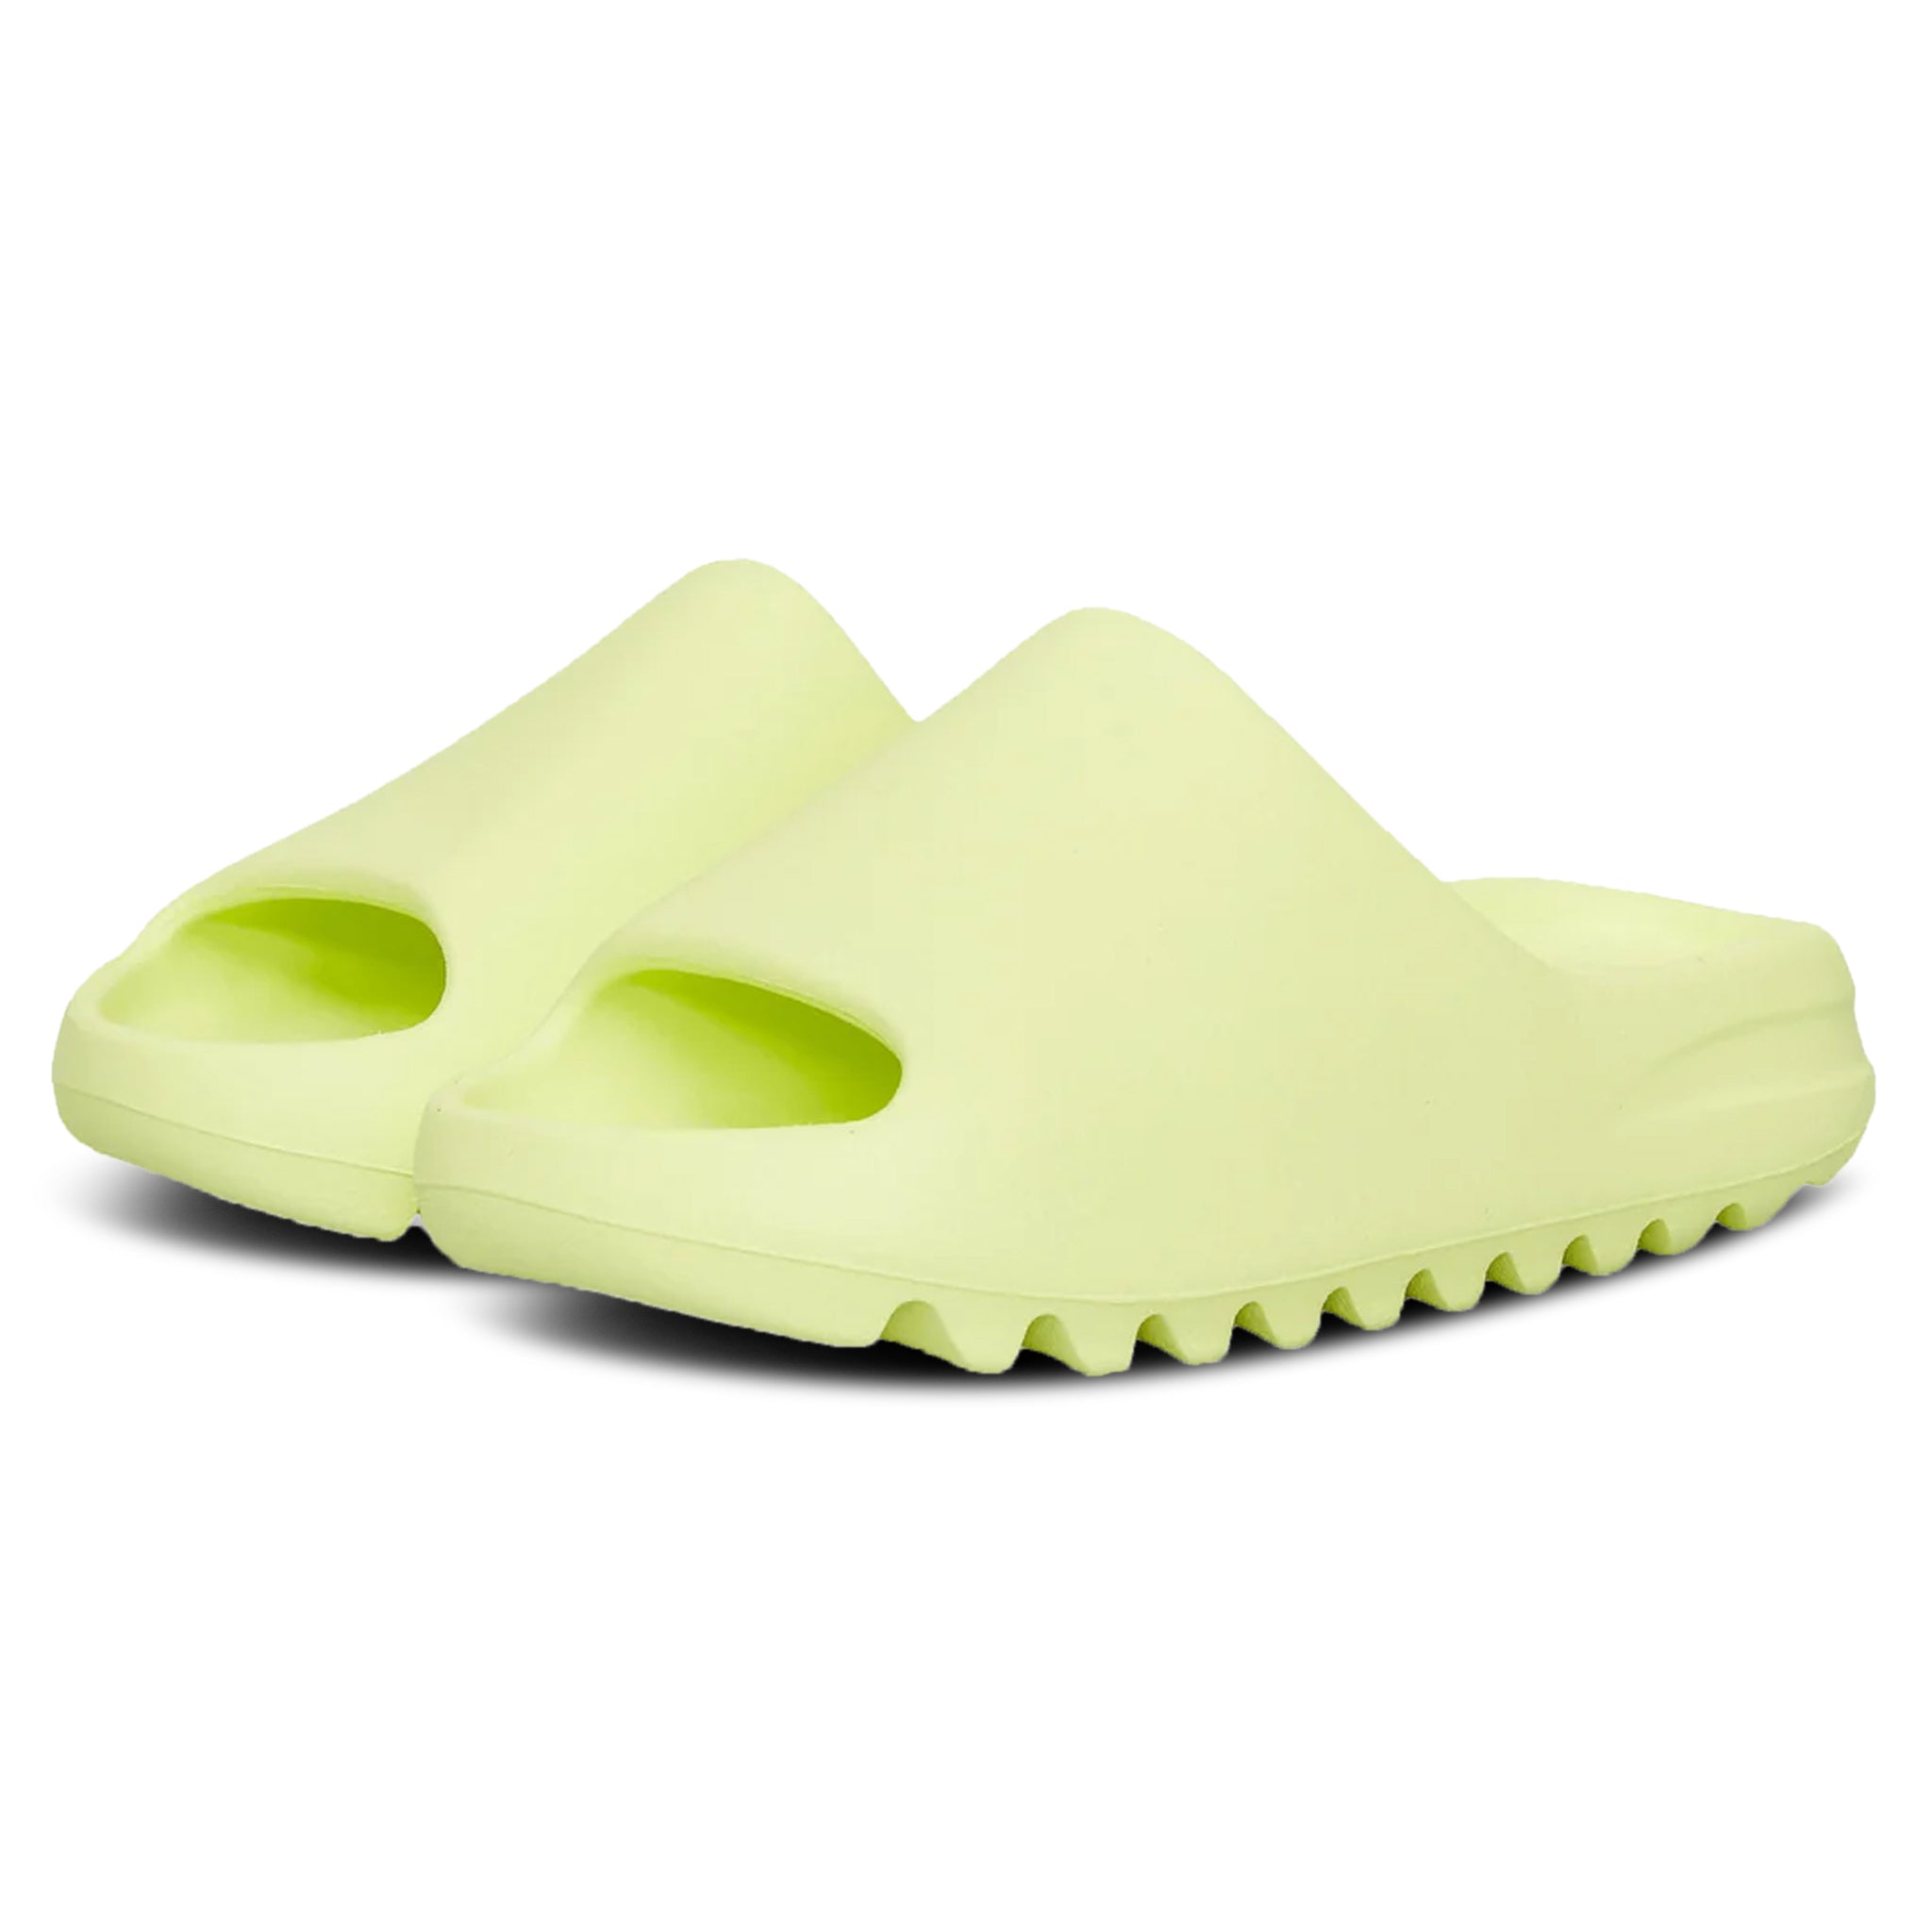 Front side view of Adidas Yeezy Slide Glow Green GX6138